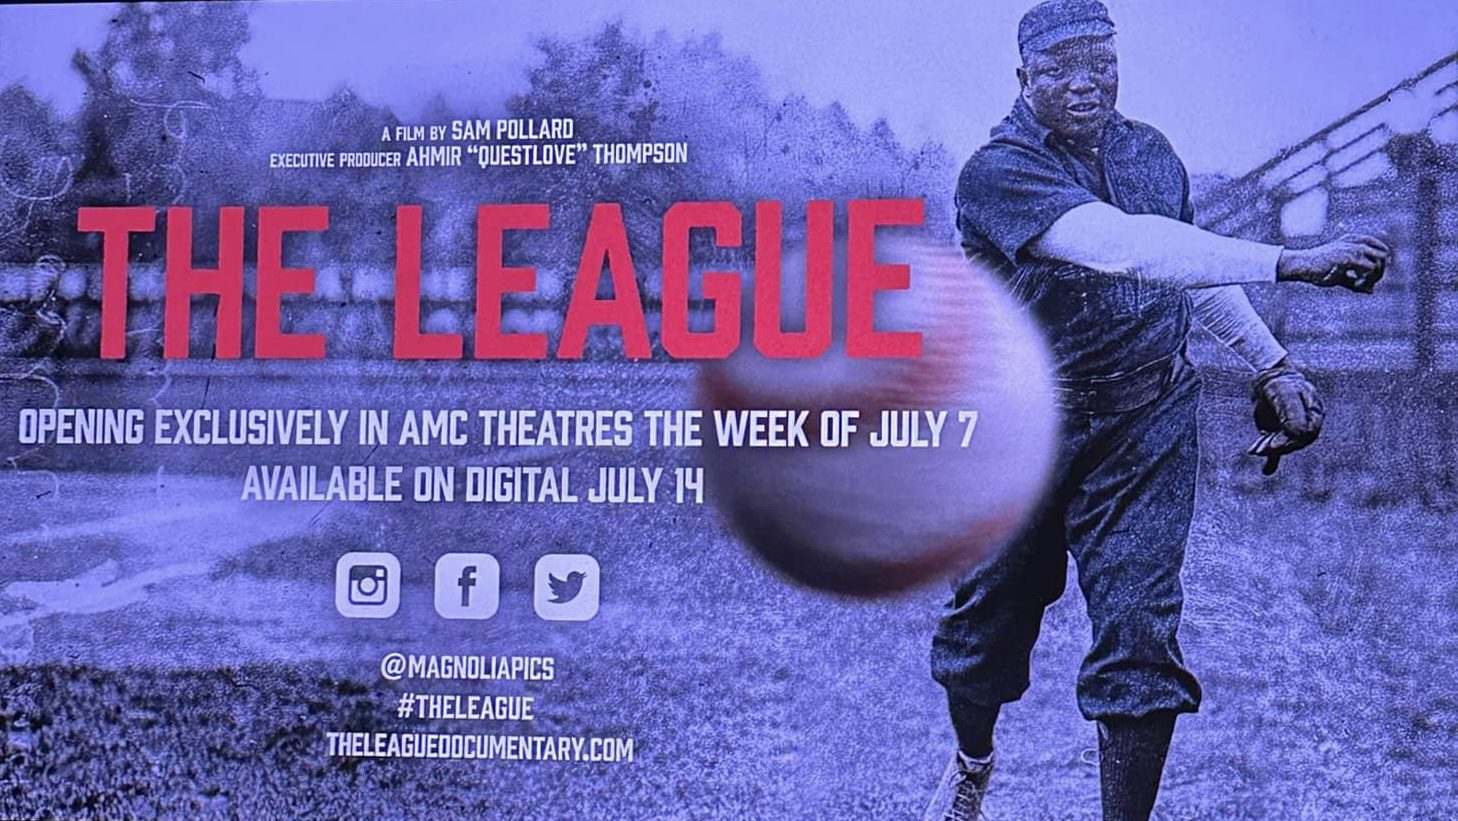 The League - Official Trailer, Directed by Sam Pollard